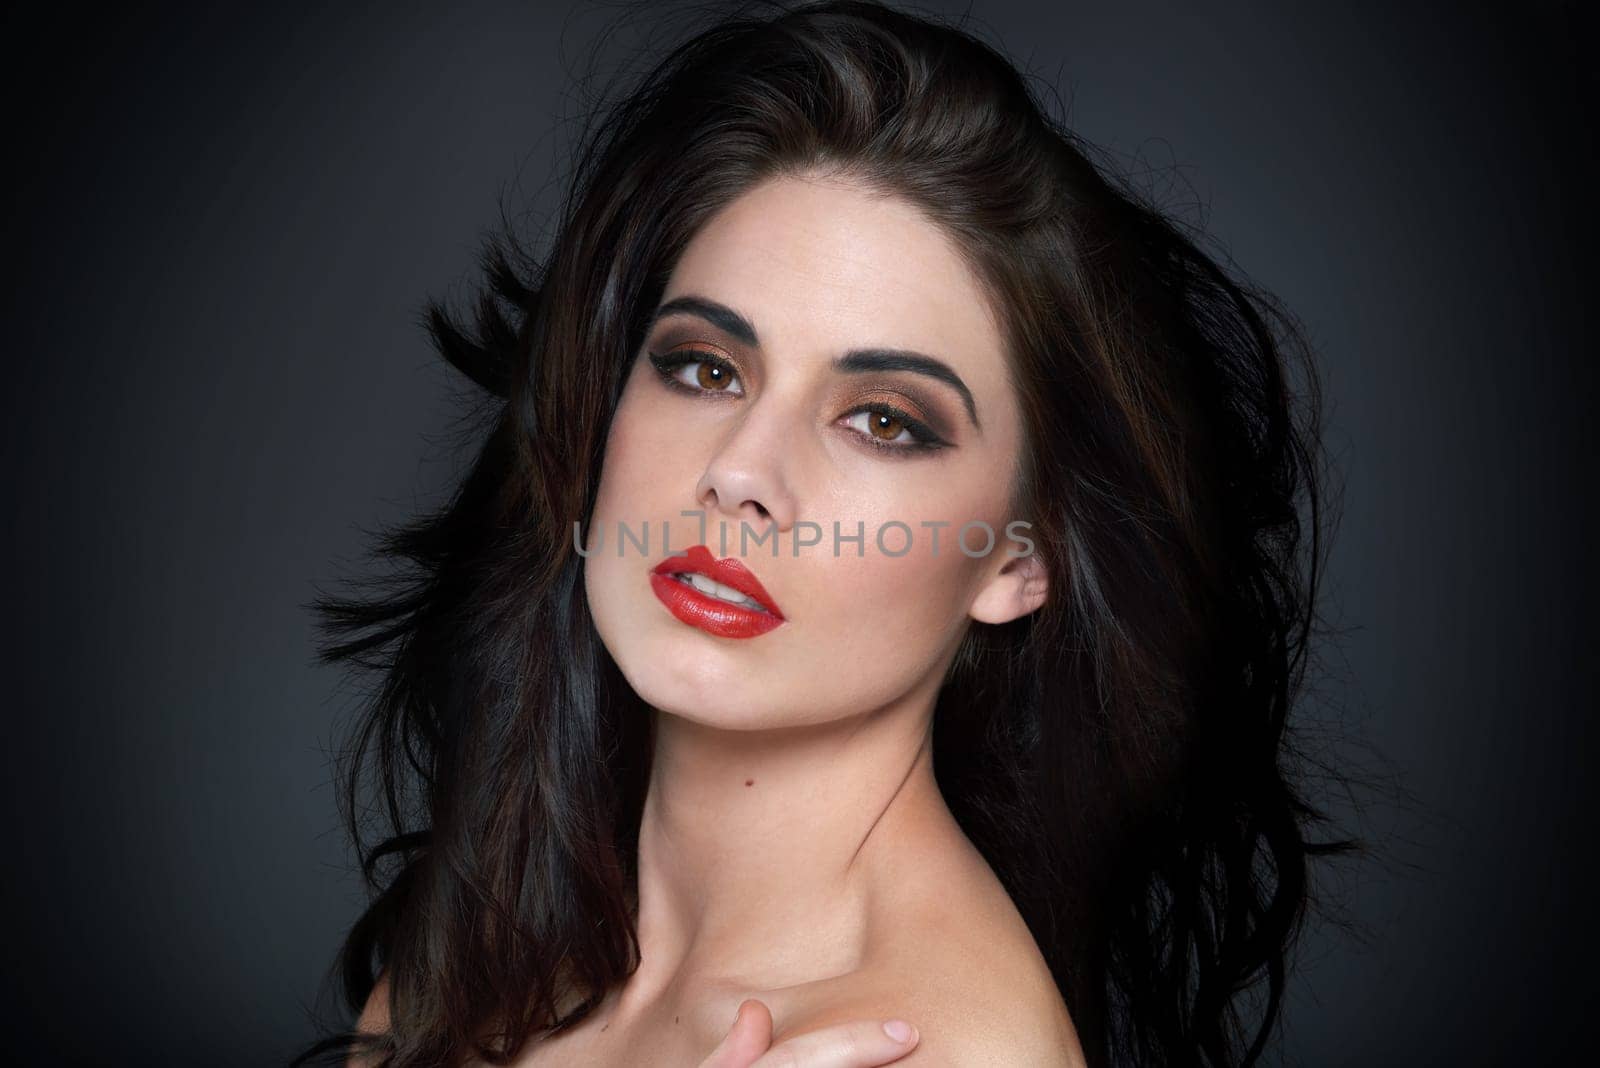 Beauty, cosmetics and portrait of woman on black background for wellness, skincare and makeup. Cosmetology, dermatology and face of person with lipstick, confidence and salon aesthetic in studio.